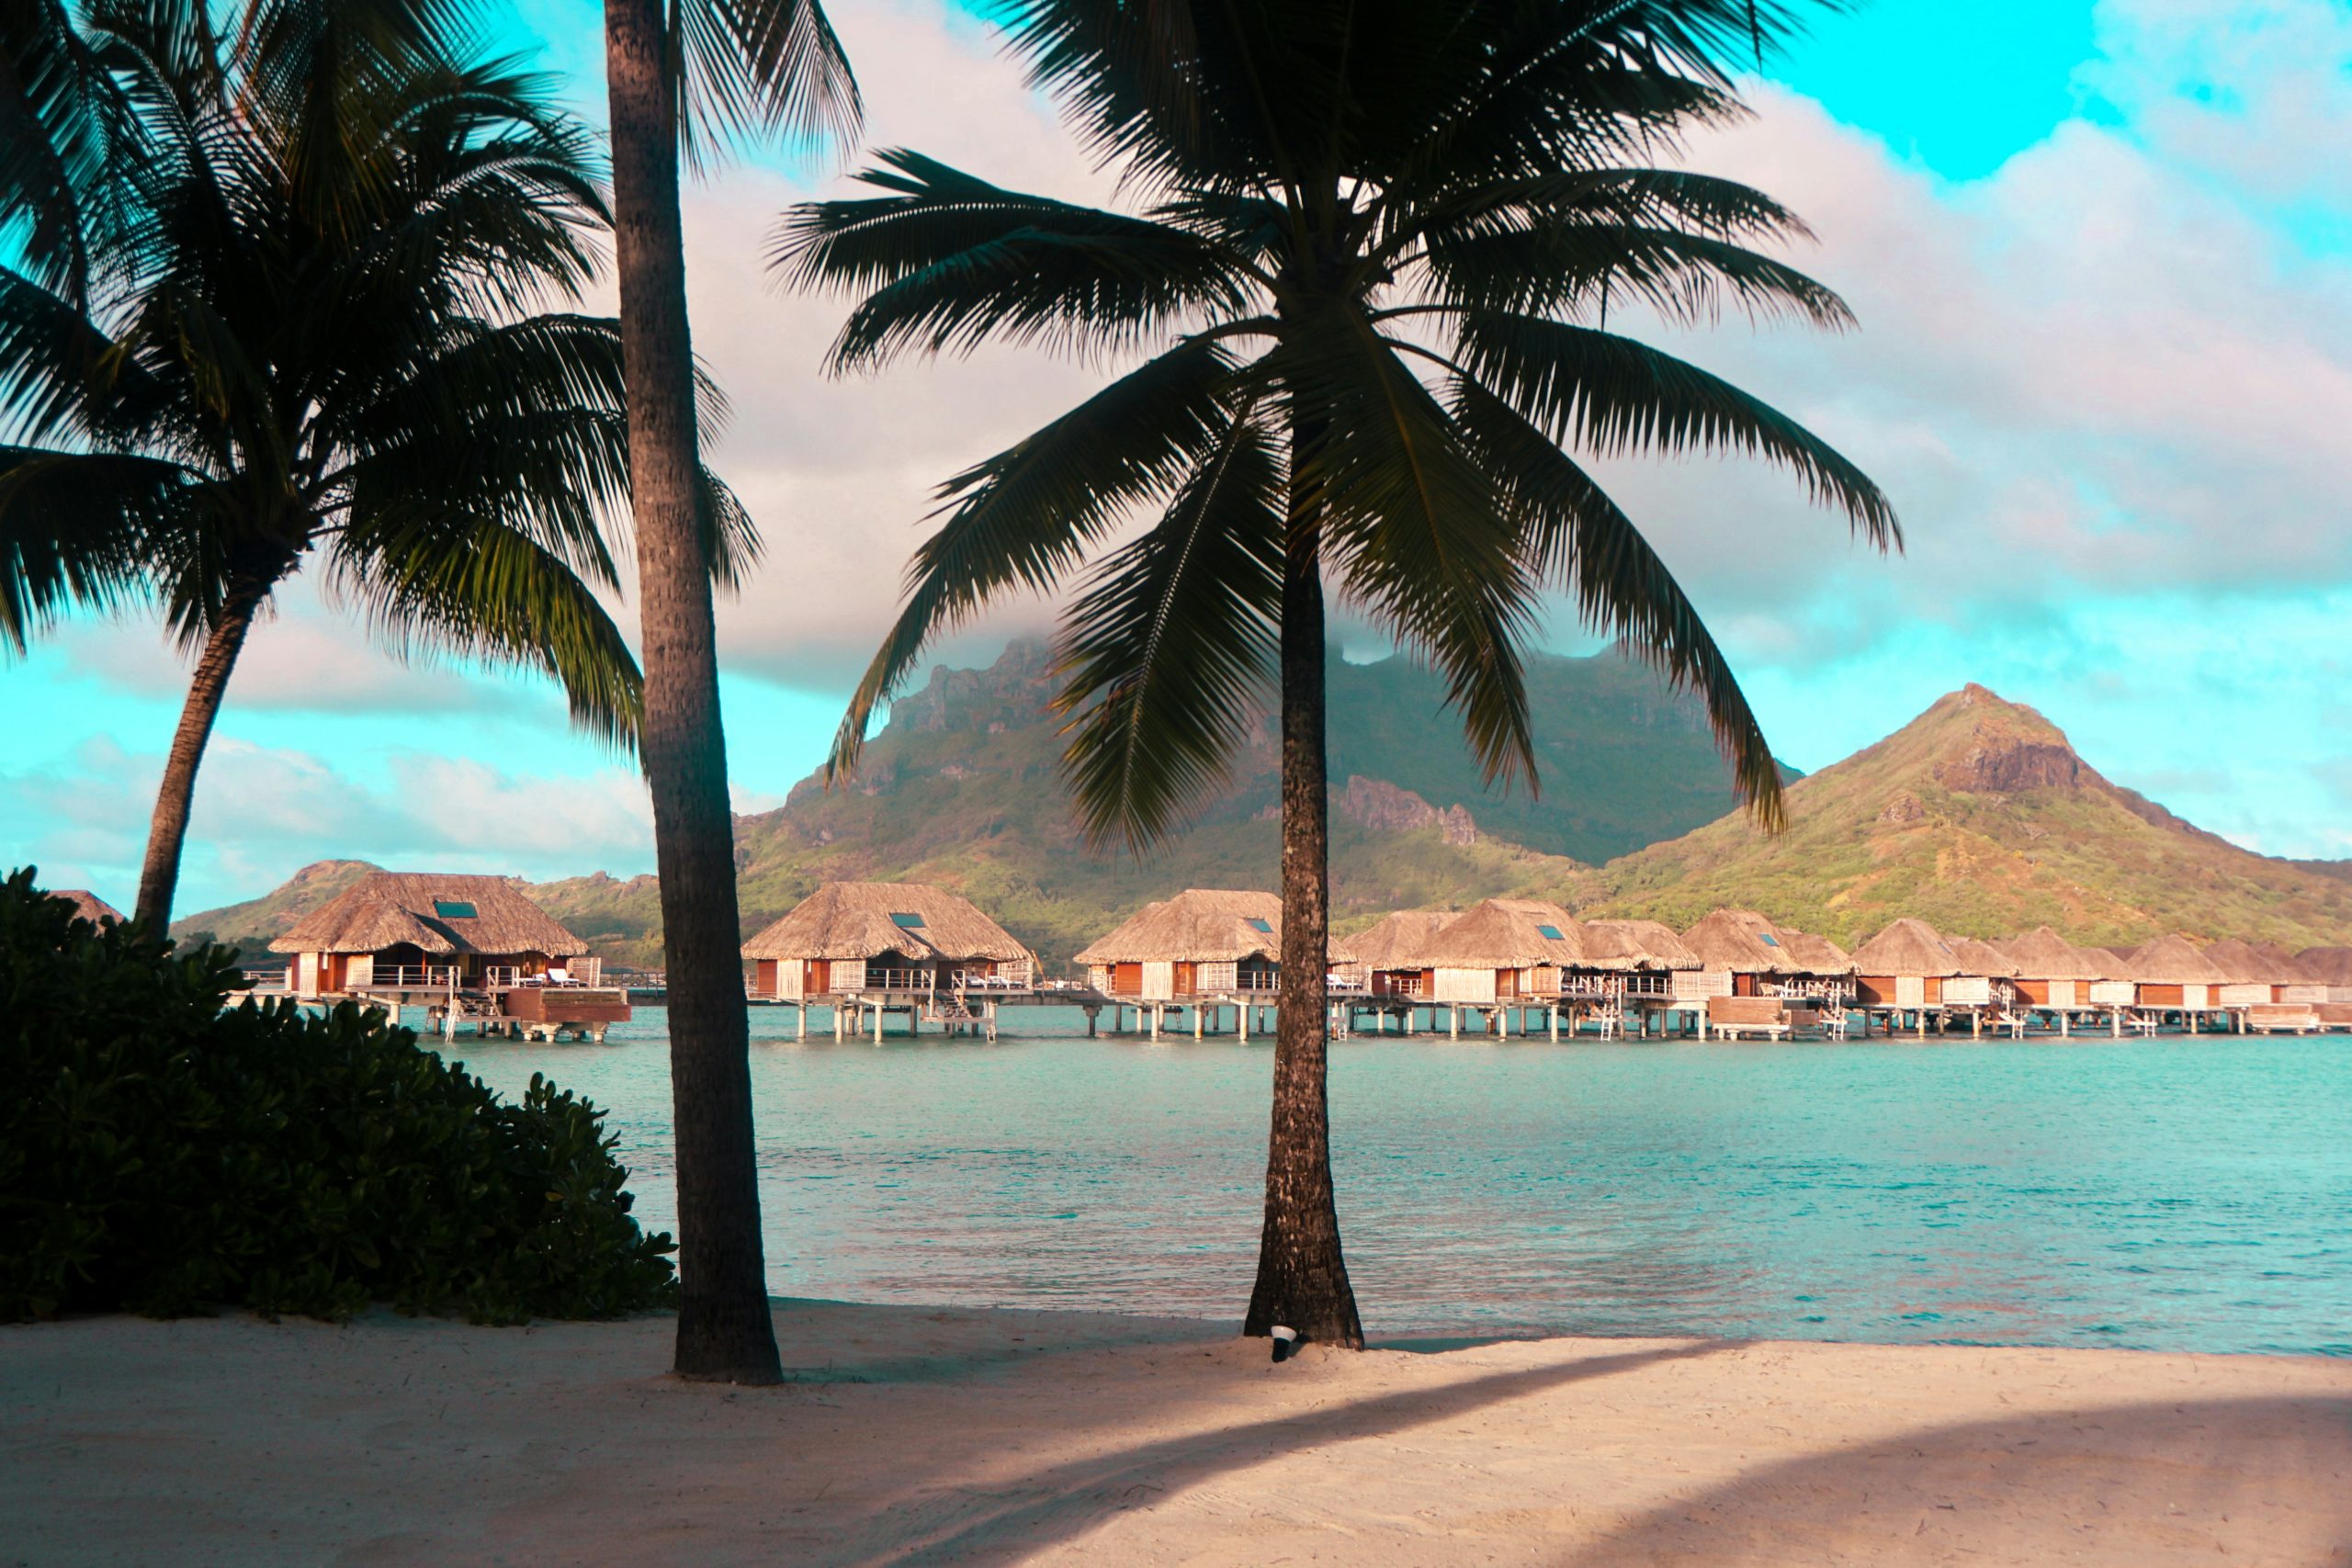 discover top hotels in tahiti for an unforgettable stay surrounded by stunning landscapes and crystal-clear waters. book your perfect tahiti hotel today!